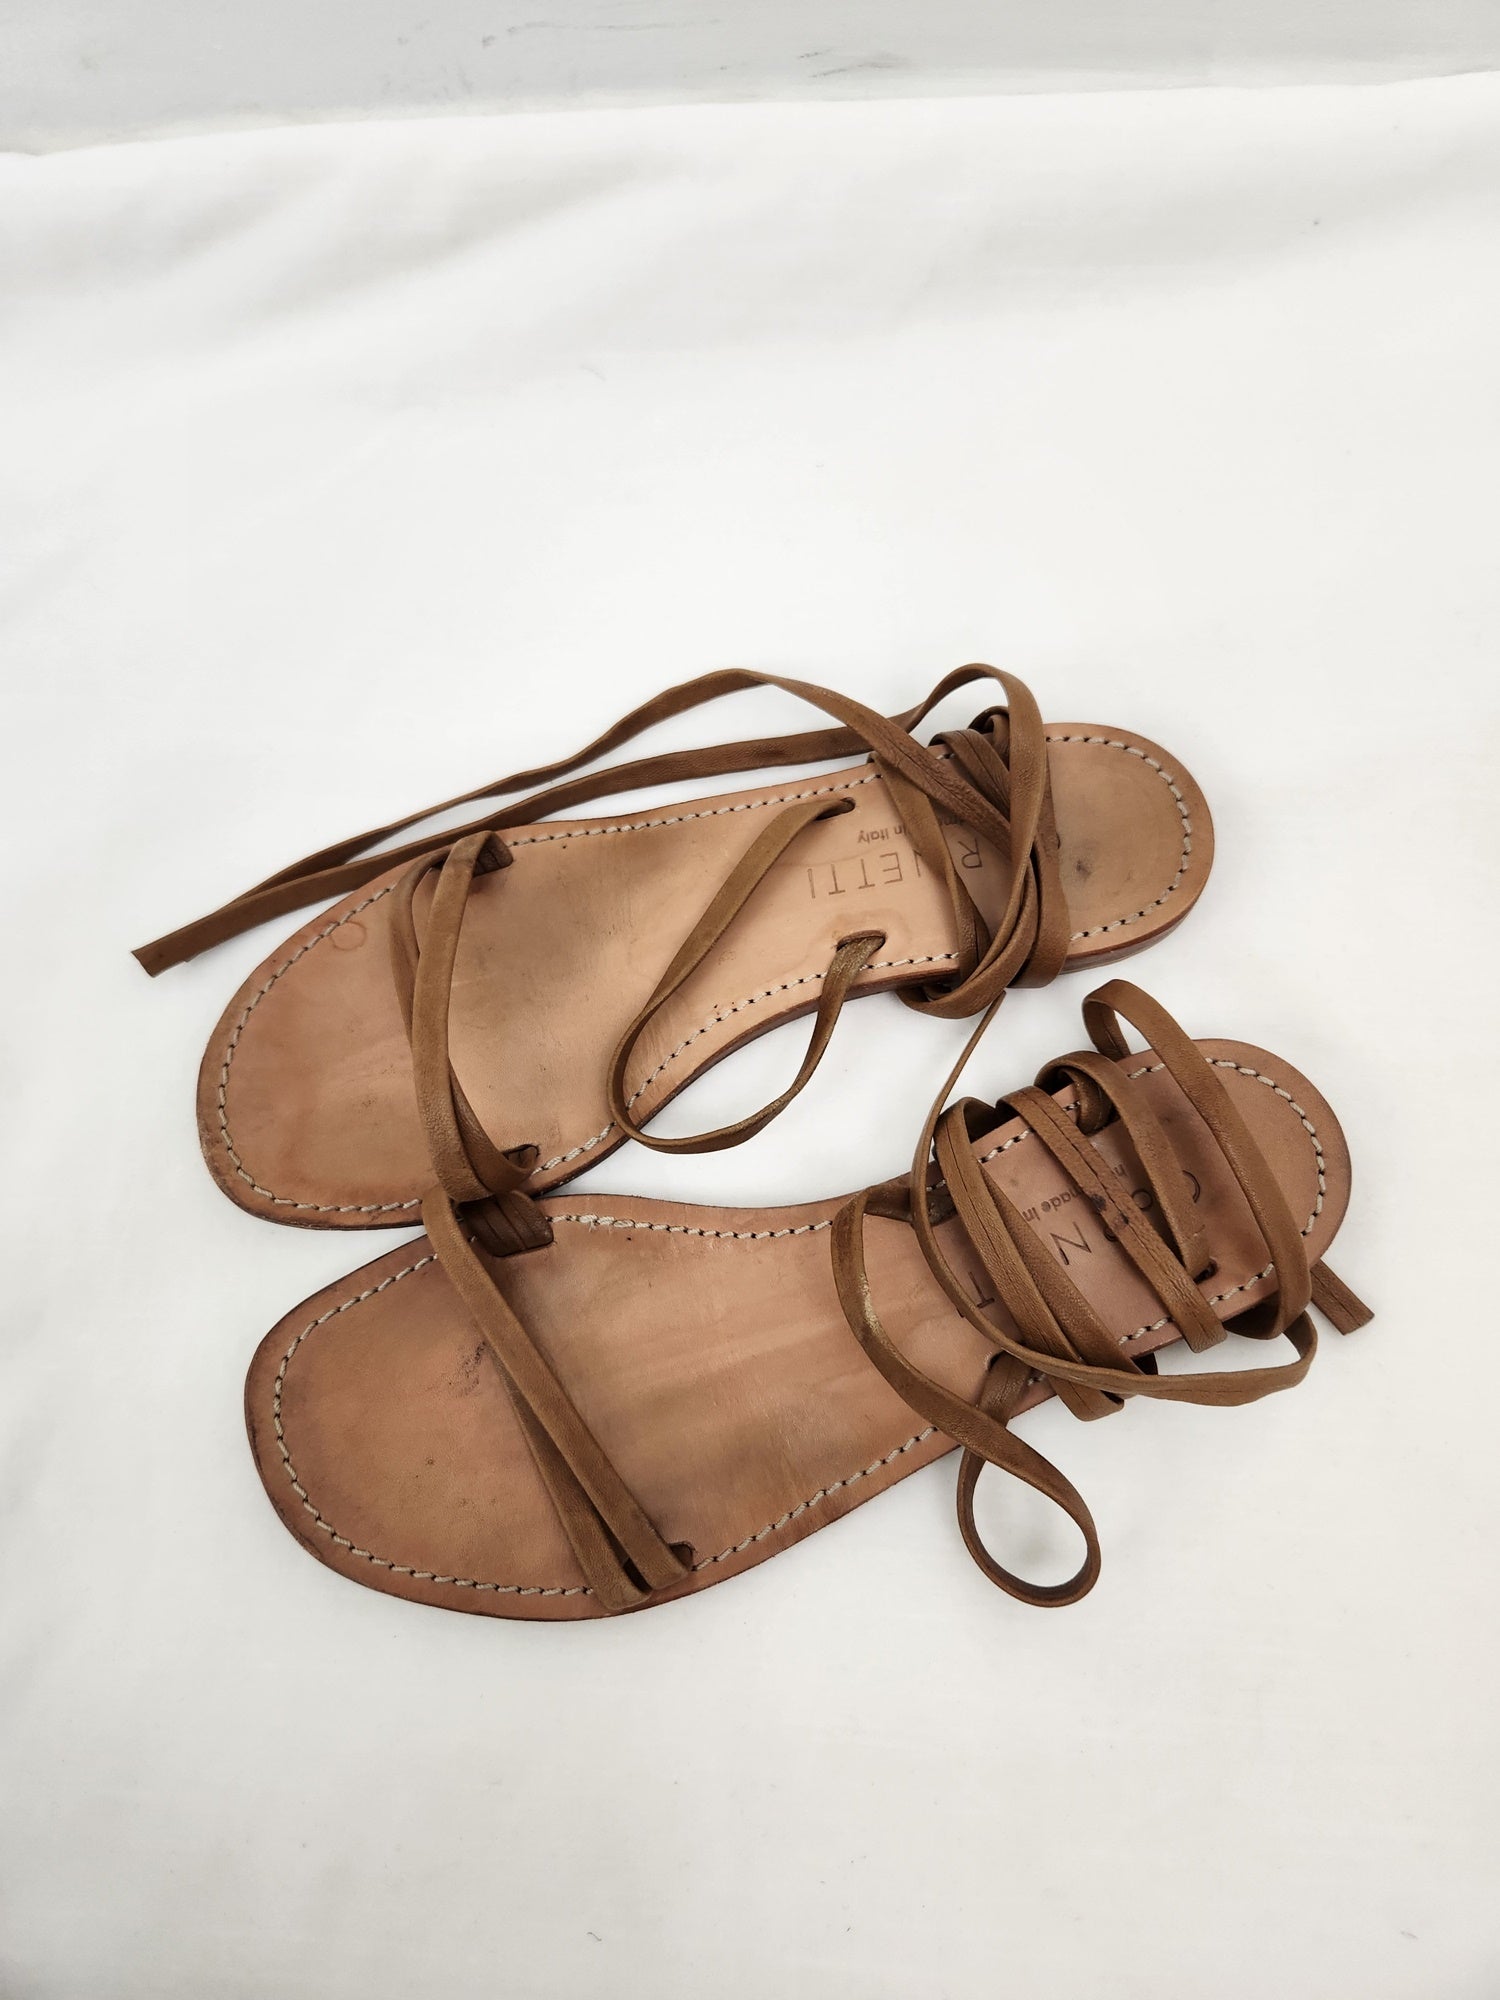 Leather Sandals Size 38